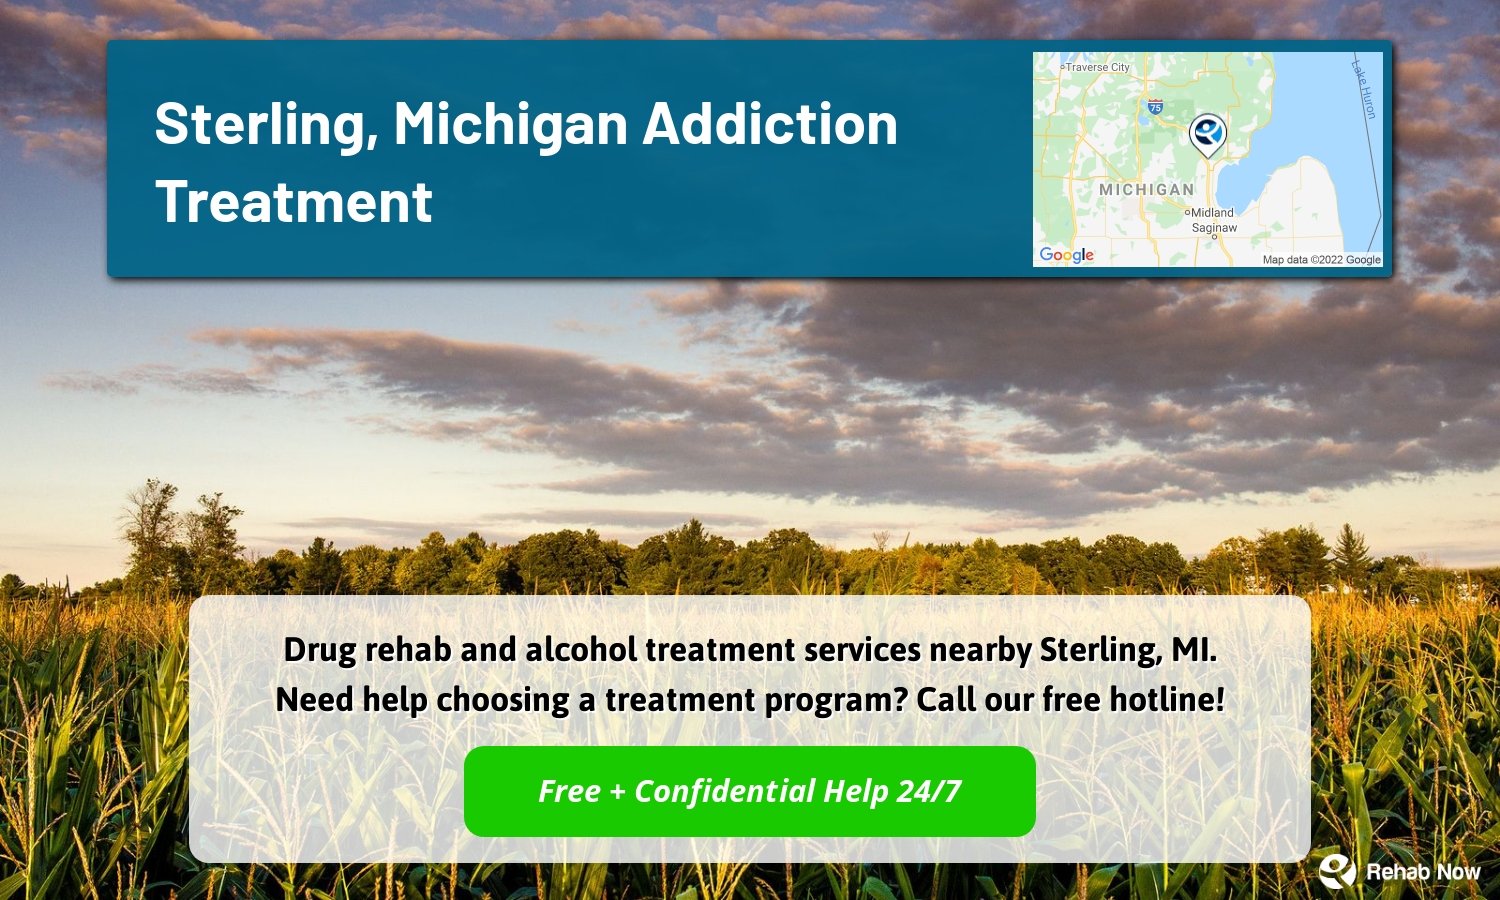 Drug rehab and alcohol treatment services nearby Sterling, MI. Need help choosing a treatment program? Call our free hotline!